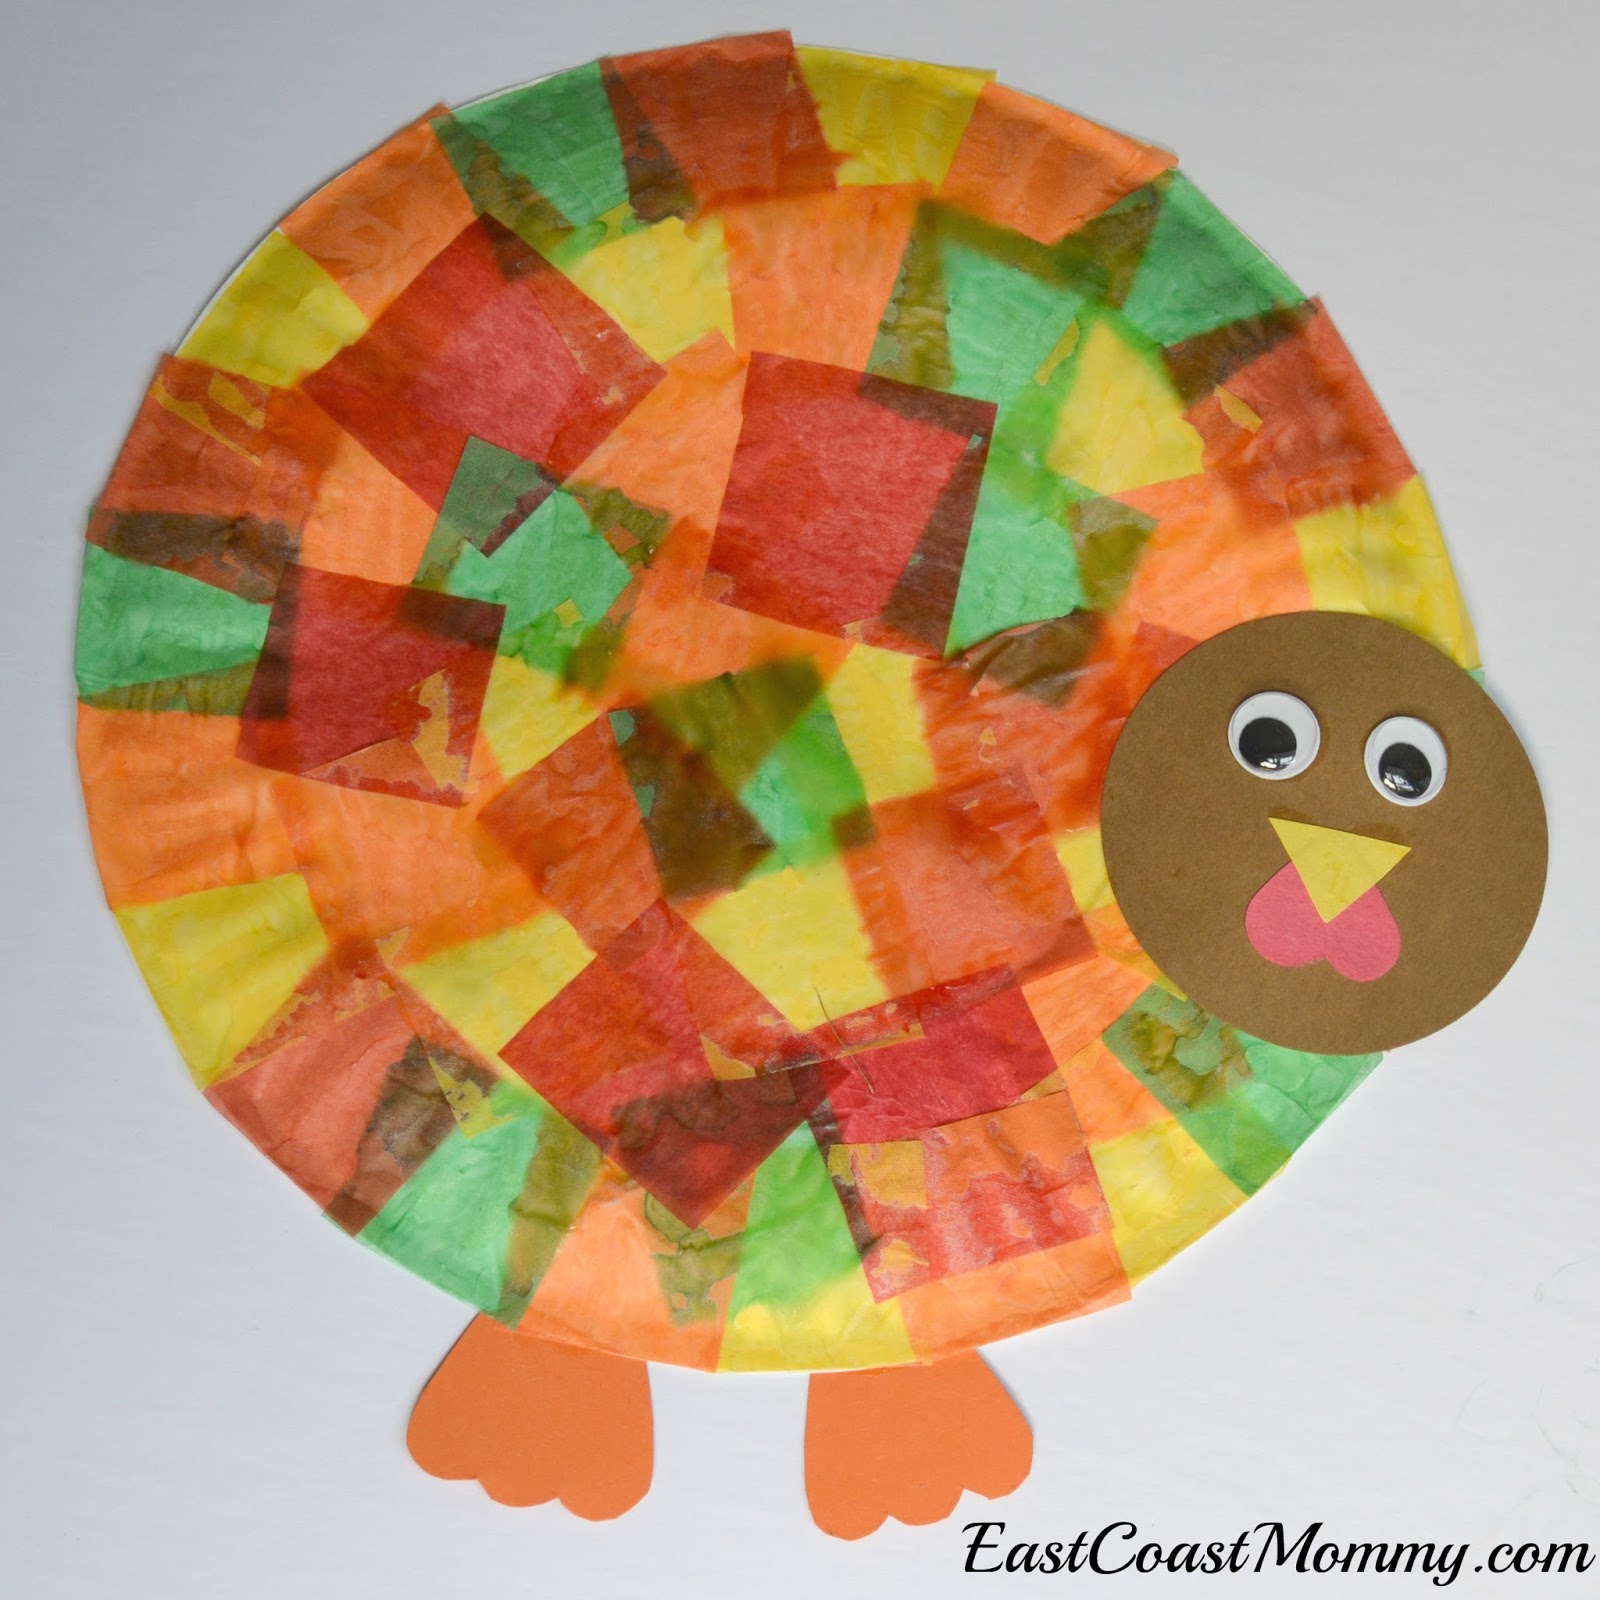 East Coast Mommy: Simple Thanksgiving Crafts for Kids